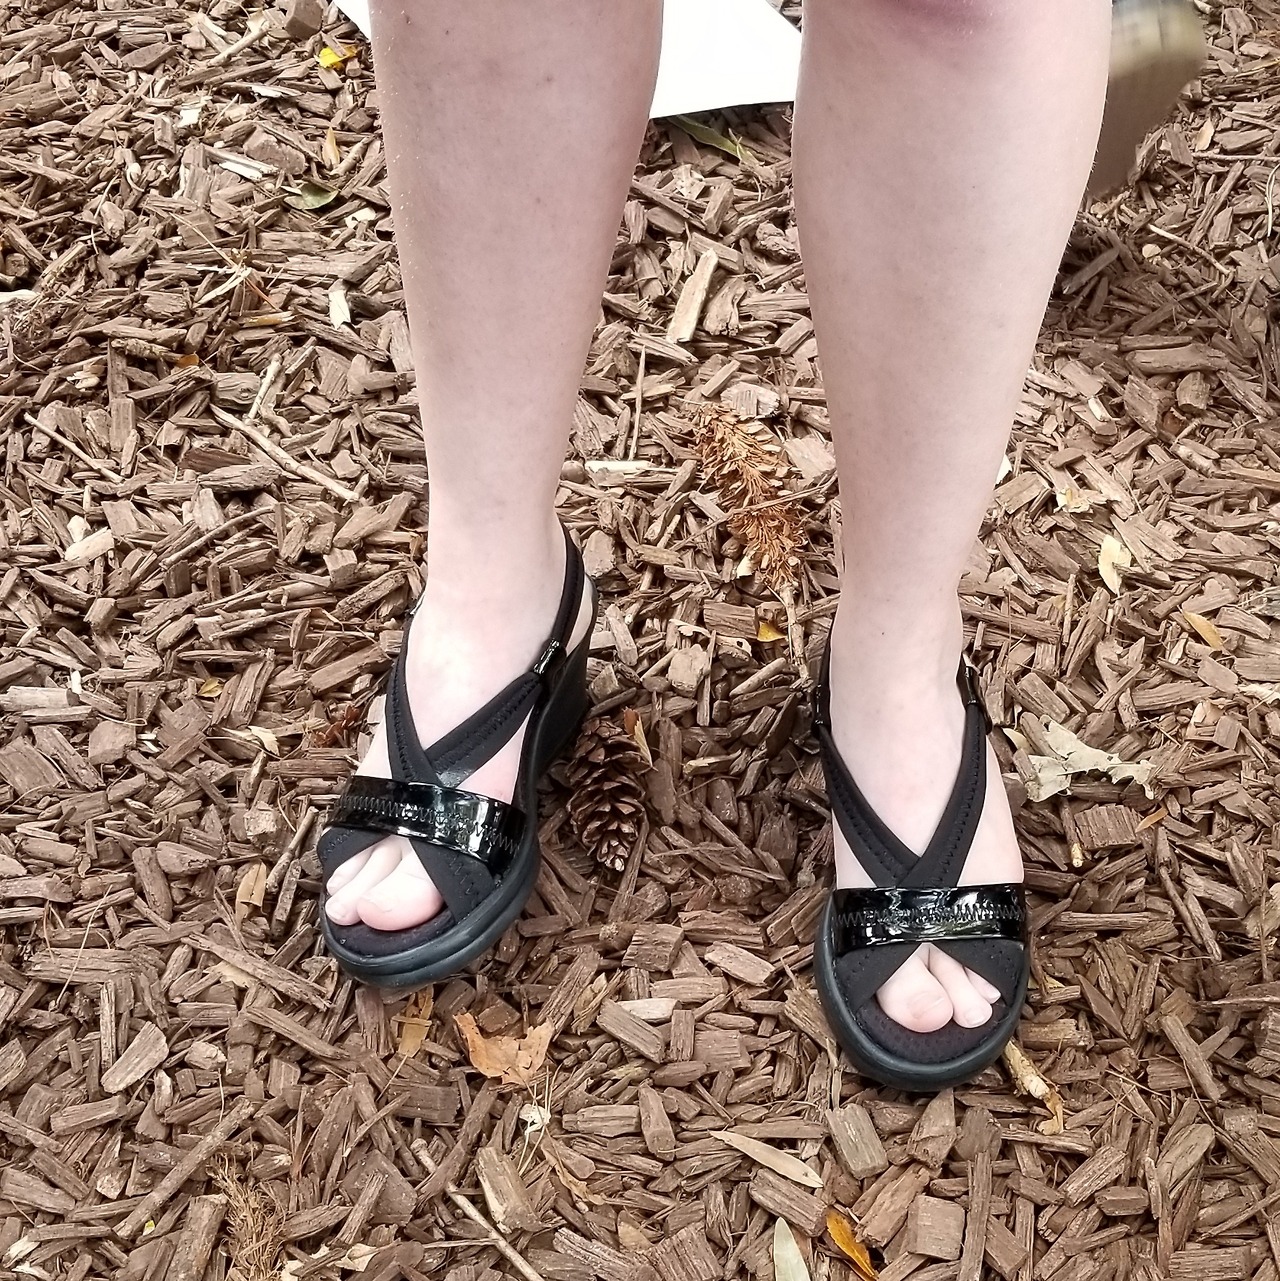 Candid Girl Feet Didnt Have A Crush On Her Fo